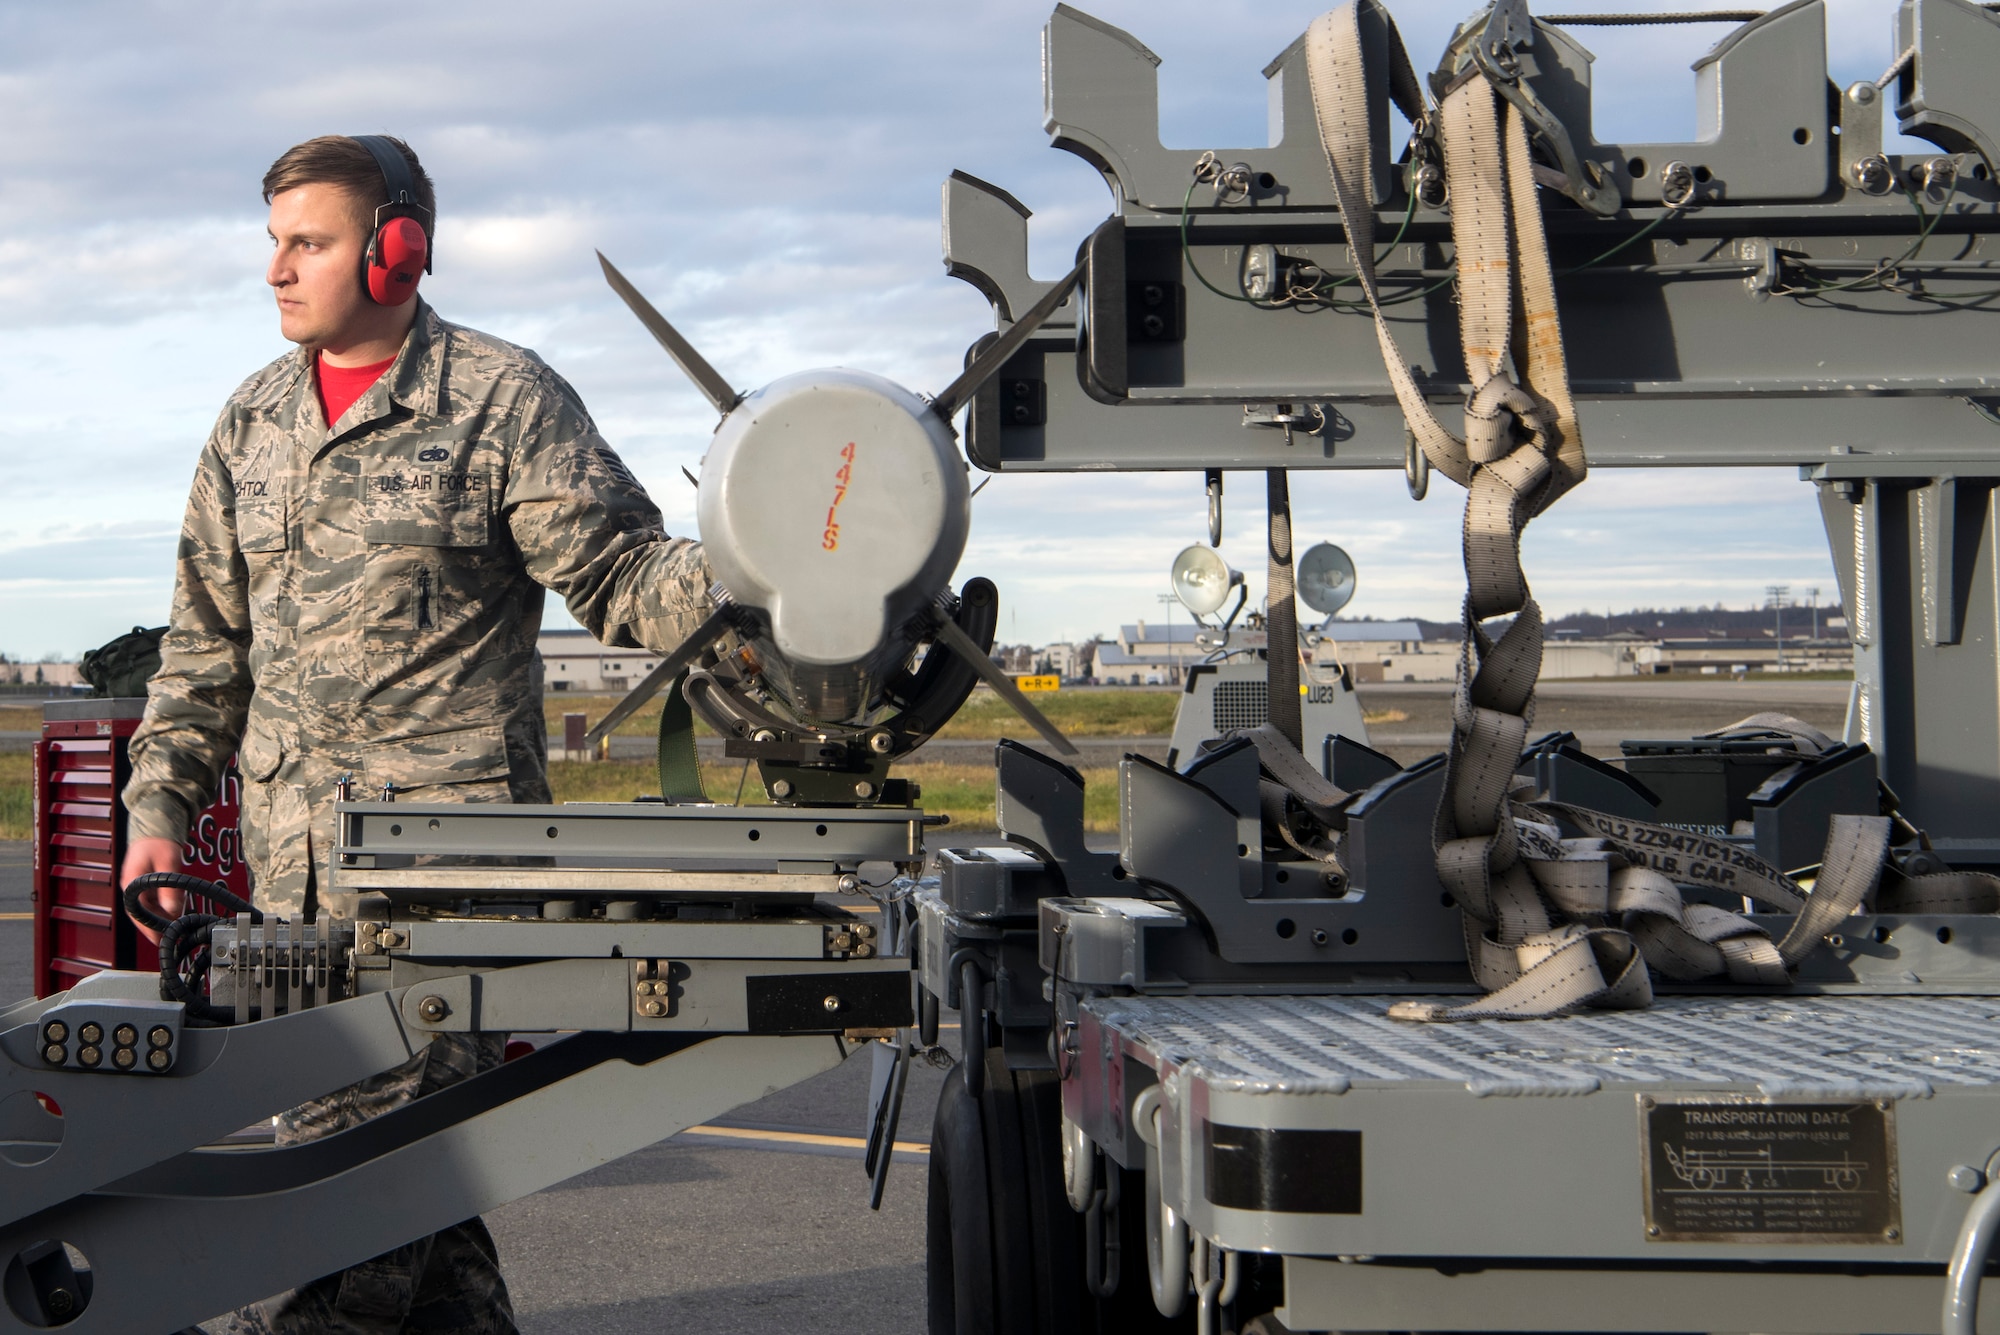 U.S. Air Force Staff Sgt. Taylor Bechtol, a 90th Aircraft Maintenance Unit weapons load crew chief, helps prepare the munition to be lifted by the jammer during the quarterly load competition at Joint Base Elmendorf-Richardson, Alaska, Oct. 26, 2018. During the competition, two teams tested their skills as load crew members for the F-22 Raptor. The event demonstrates the skill level and knowledge of all JBER aircraft maintainers.